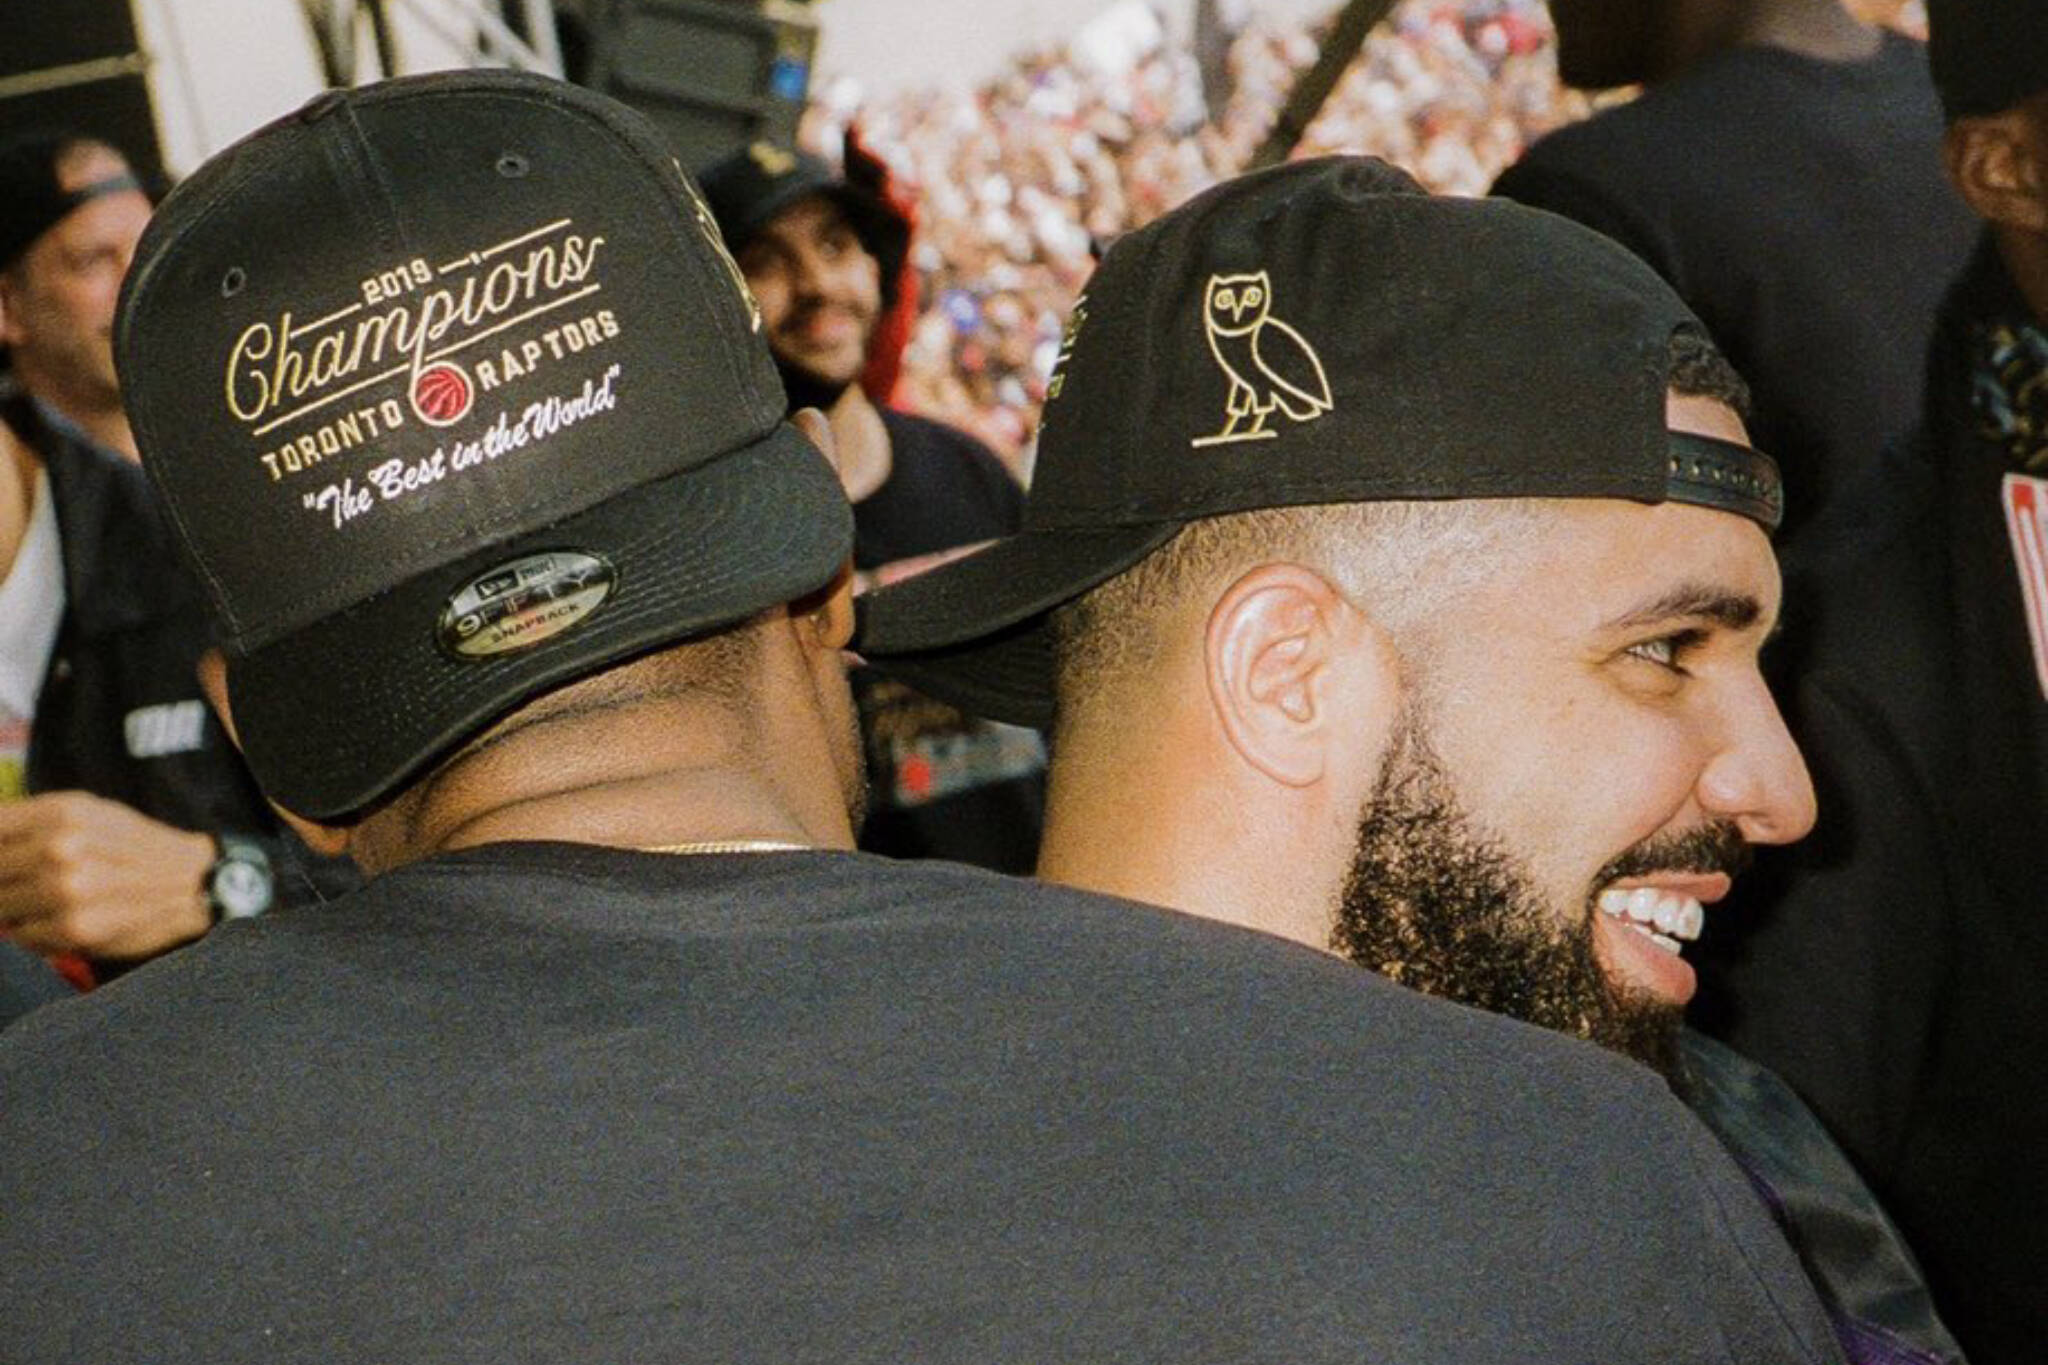 Limited edition OVO Raptors gear sells out, going online for